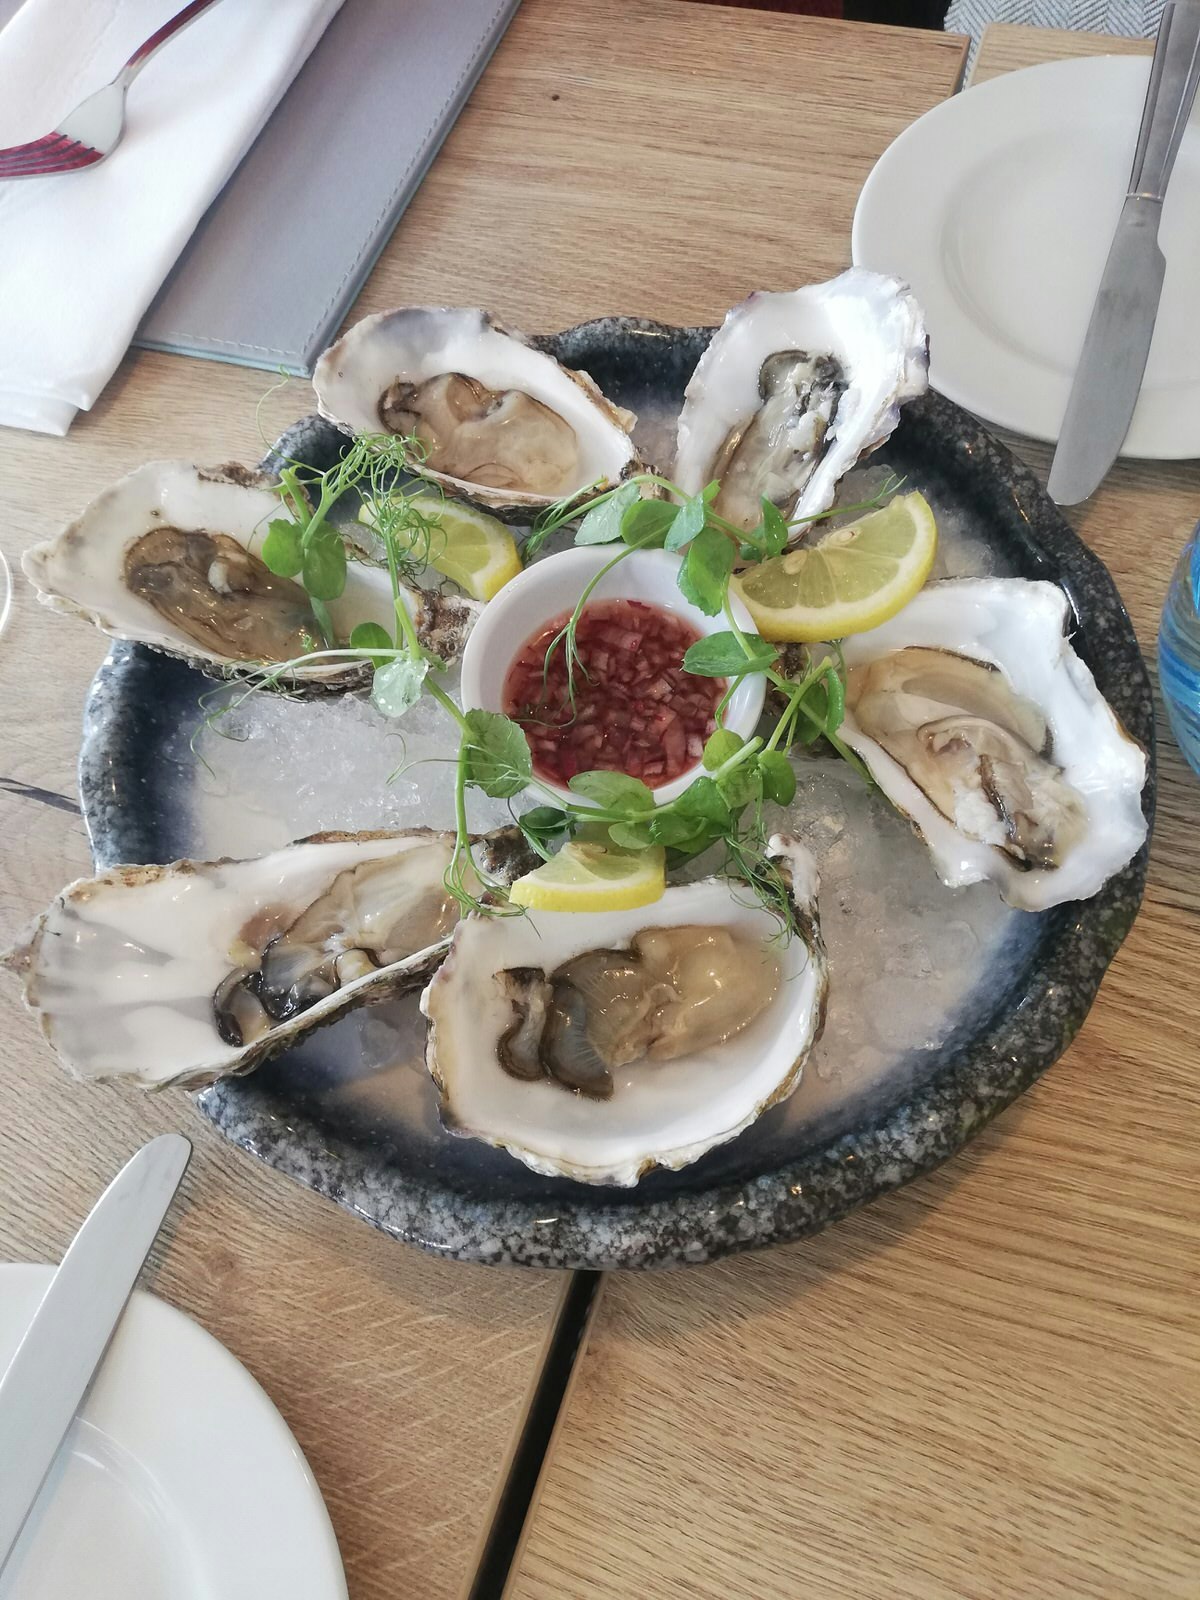 Half a dozen Porlock Bay oysters served on ice with wedges of lime and some chilli